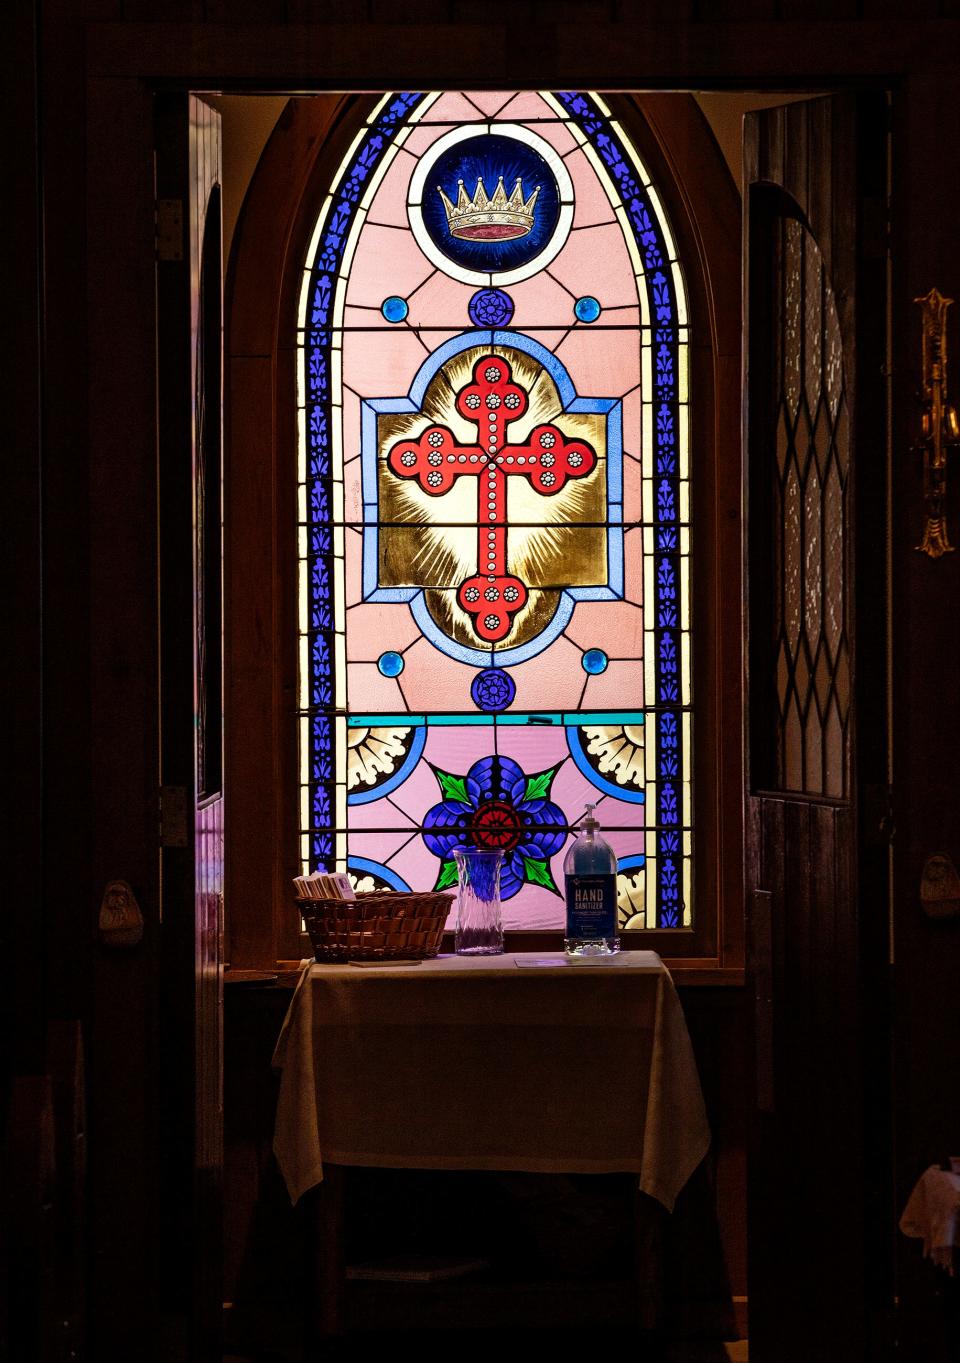 Stained-glass windows line the sanctuary of St. Alban's Episcopal Church in Auburndale. The church is celebrating its 125th anniversary this month.